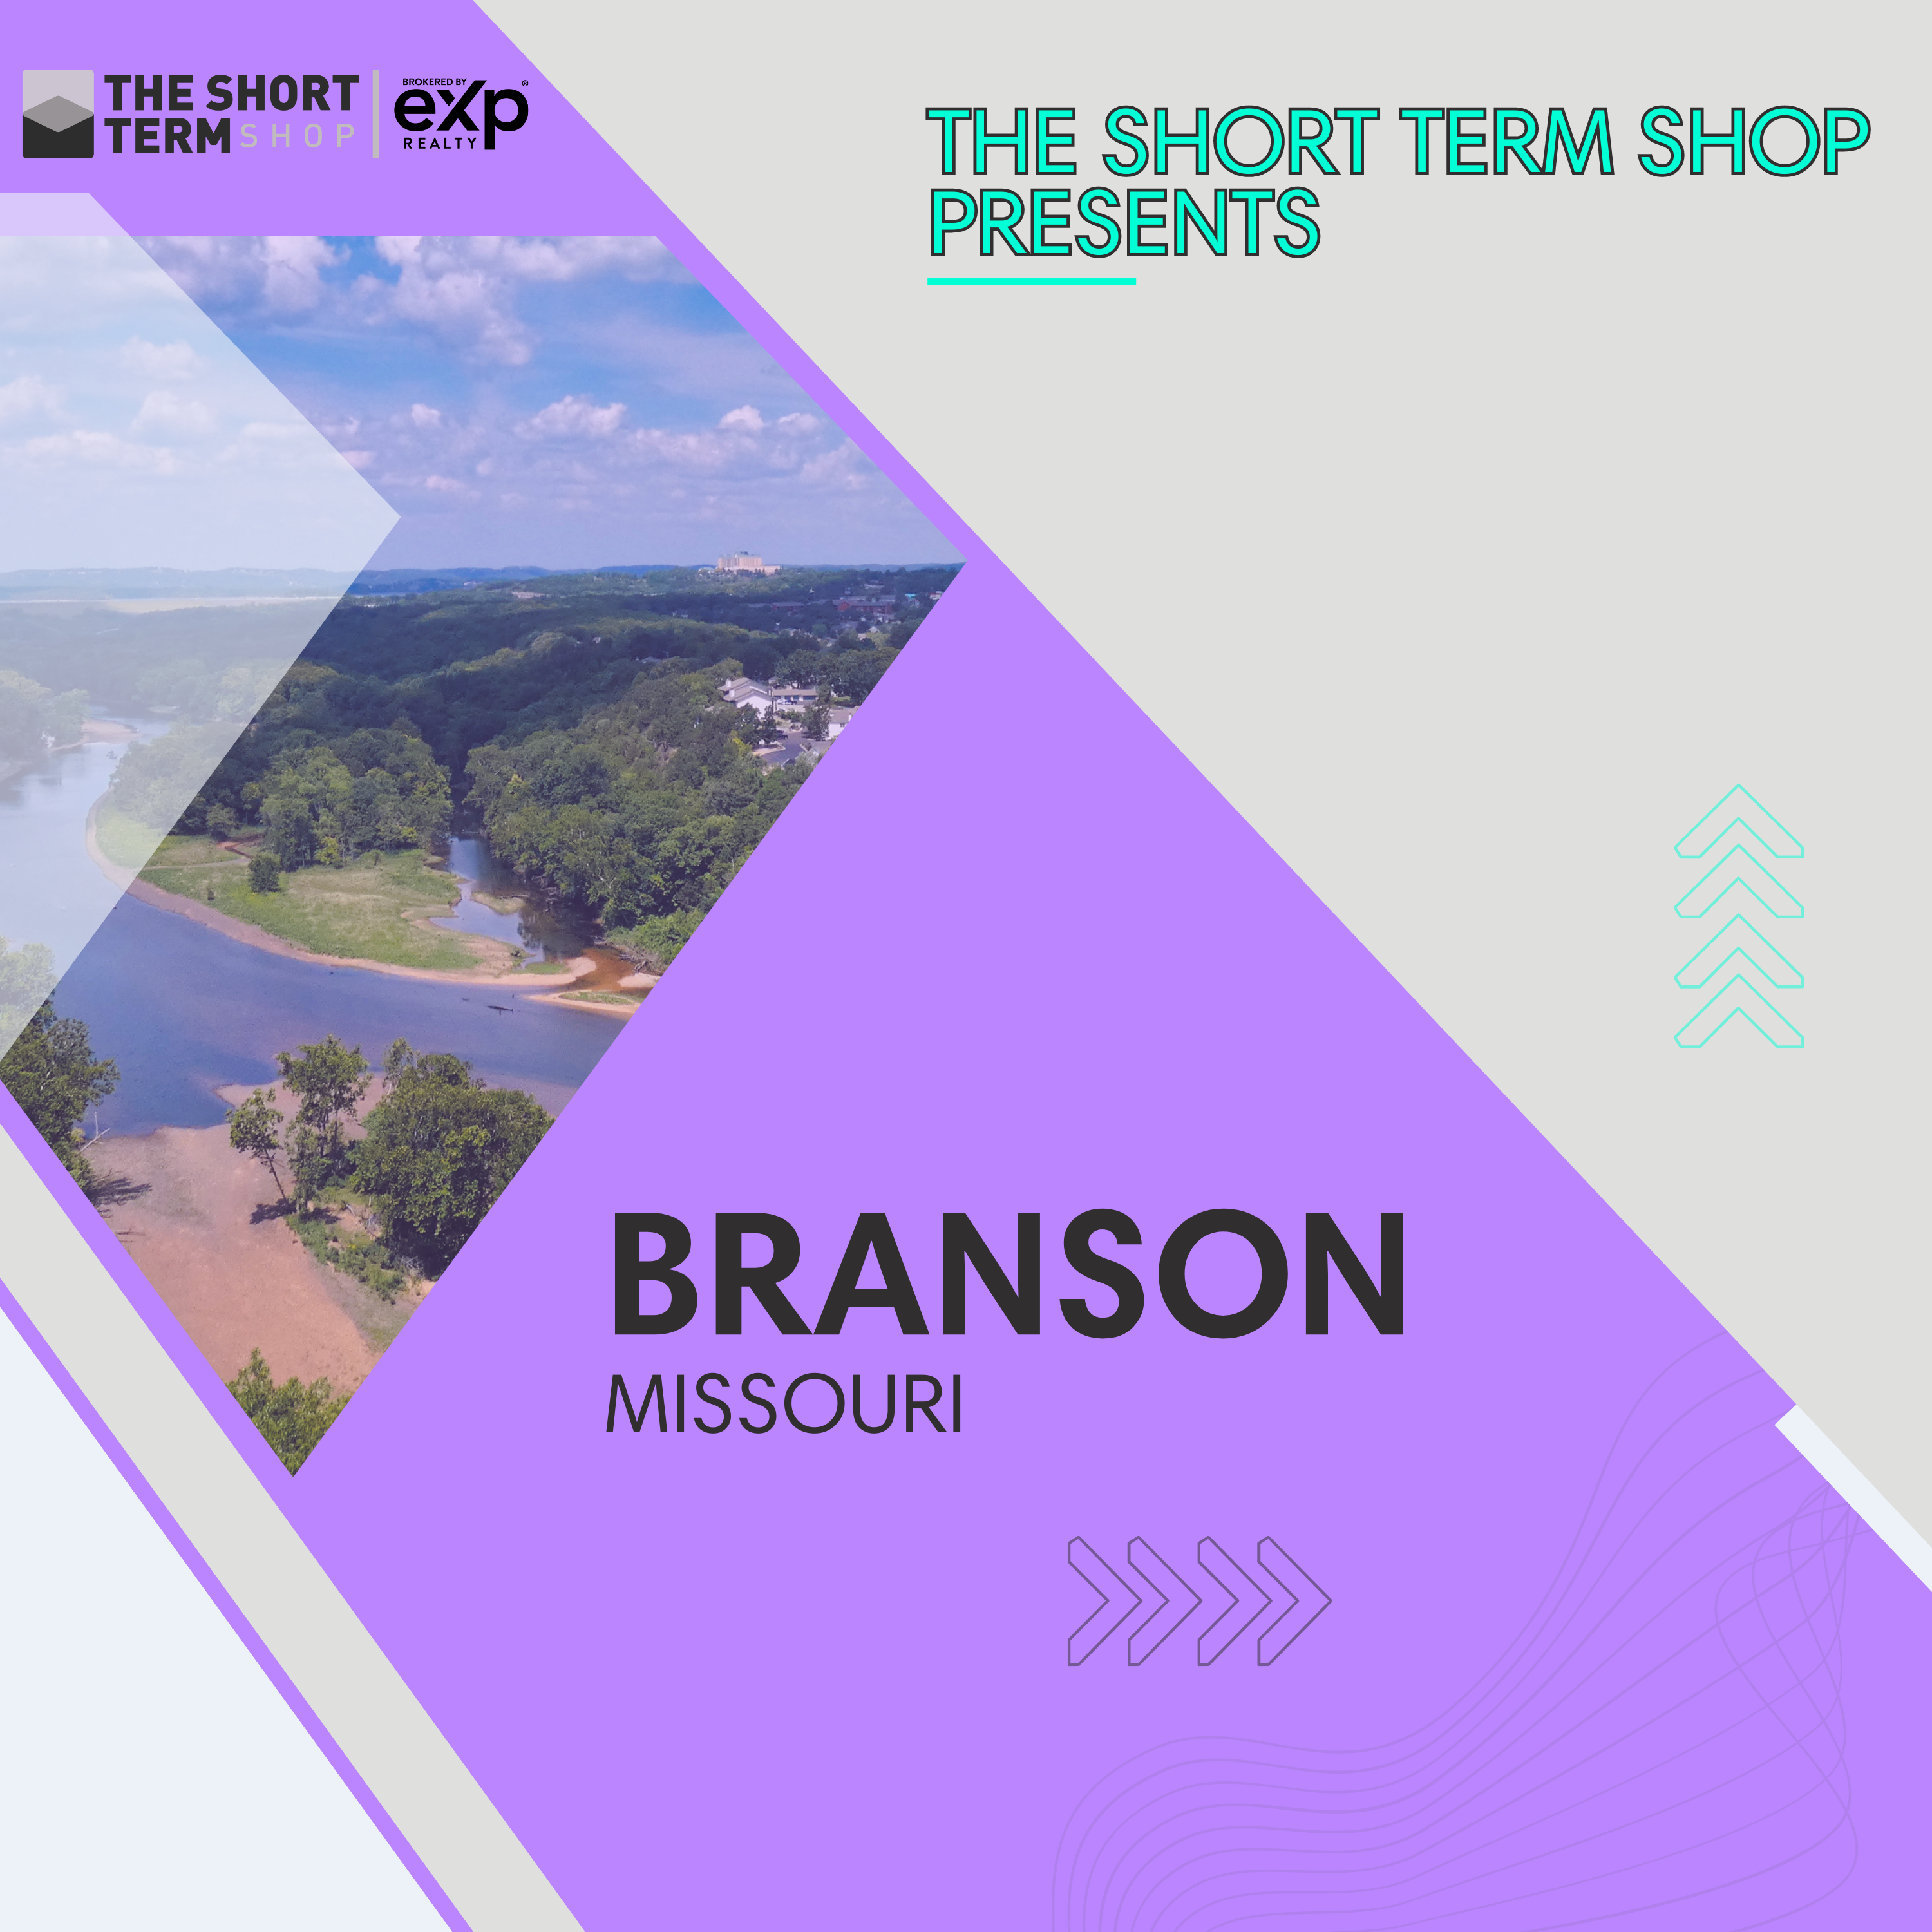 The Real Estate Contract Process When Investing in Short Term Rentals in Branson, Missouri